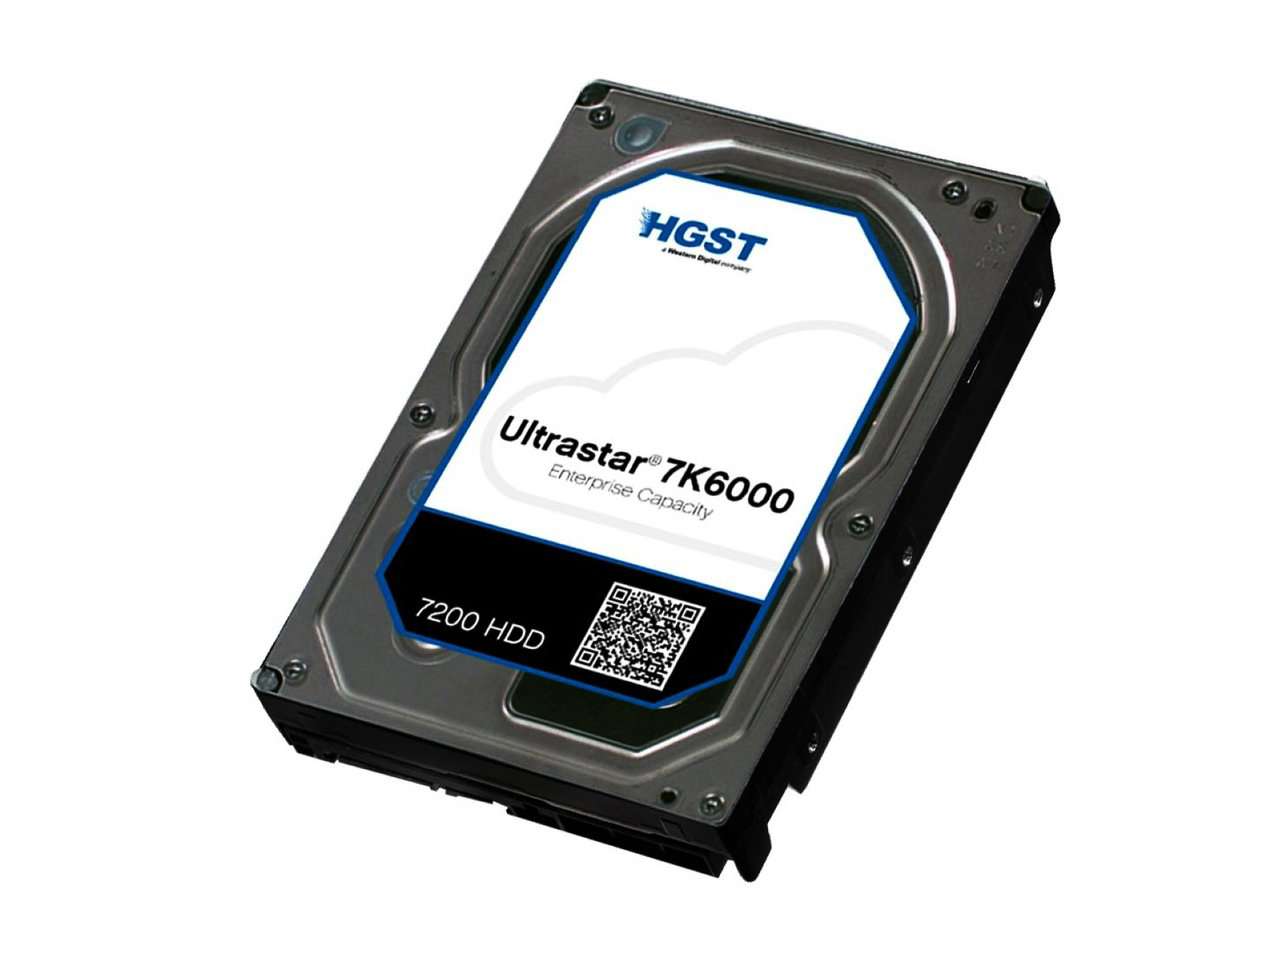 HGST Ultrastar 7K6000 0F22825  HUS726040AL5215 4TB 7.2K RPM SAS 12Gb/s 512e 128MB Cache 3.5" TCG FIPS Manufacturer Recertified HDD